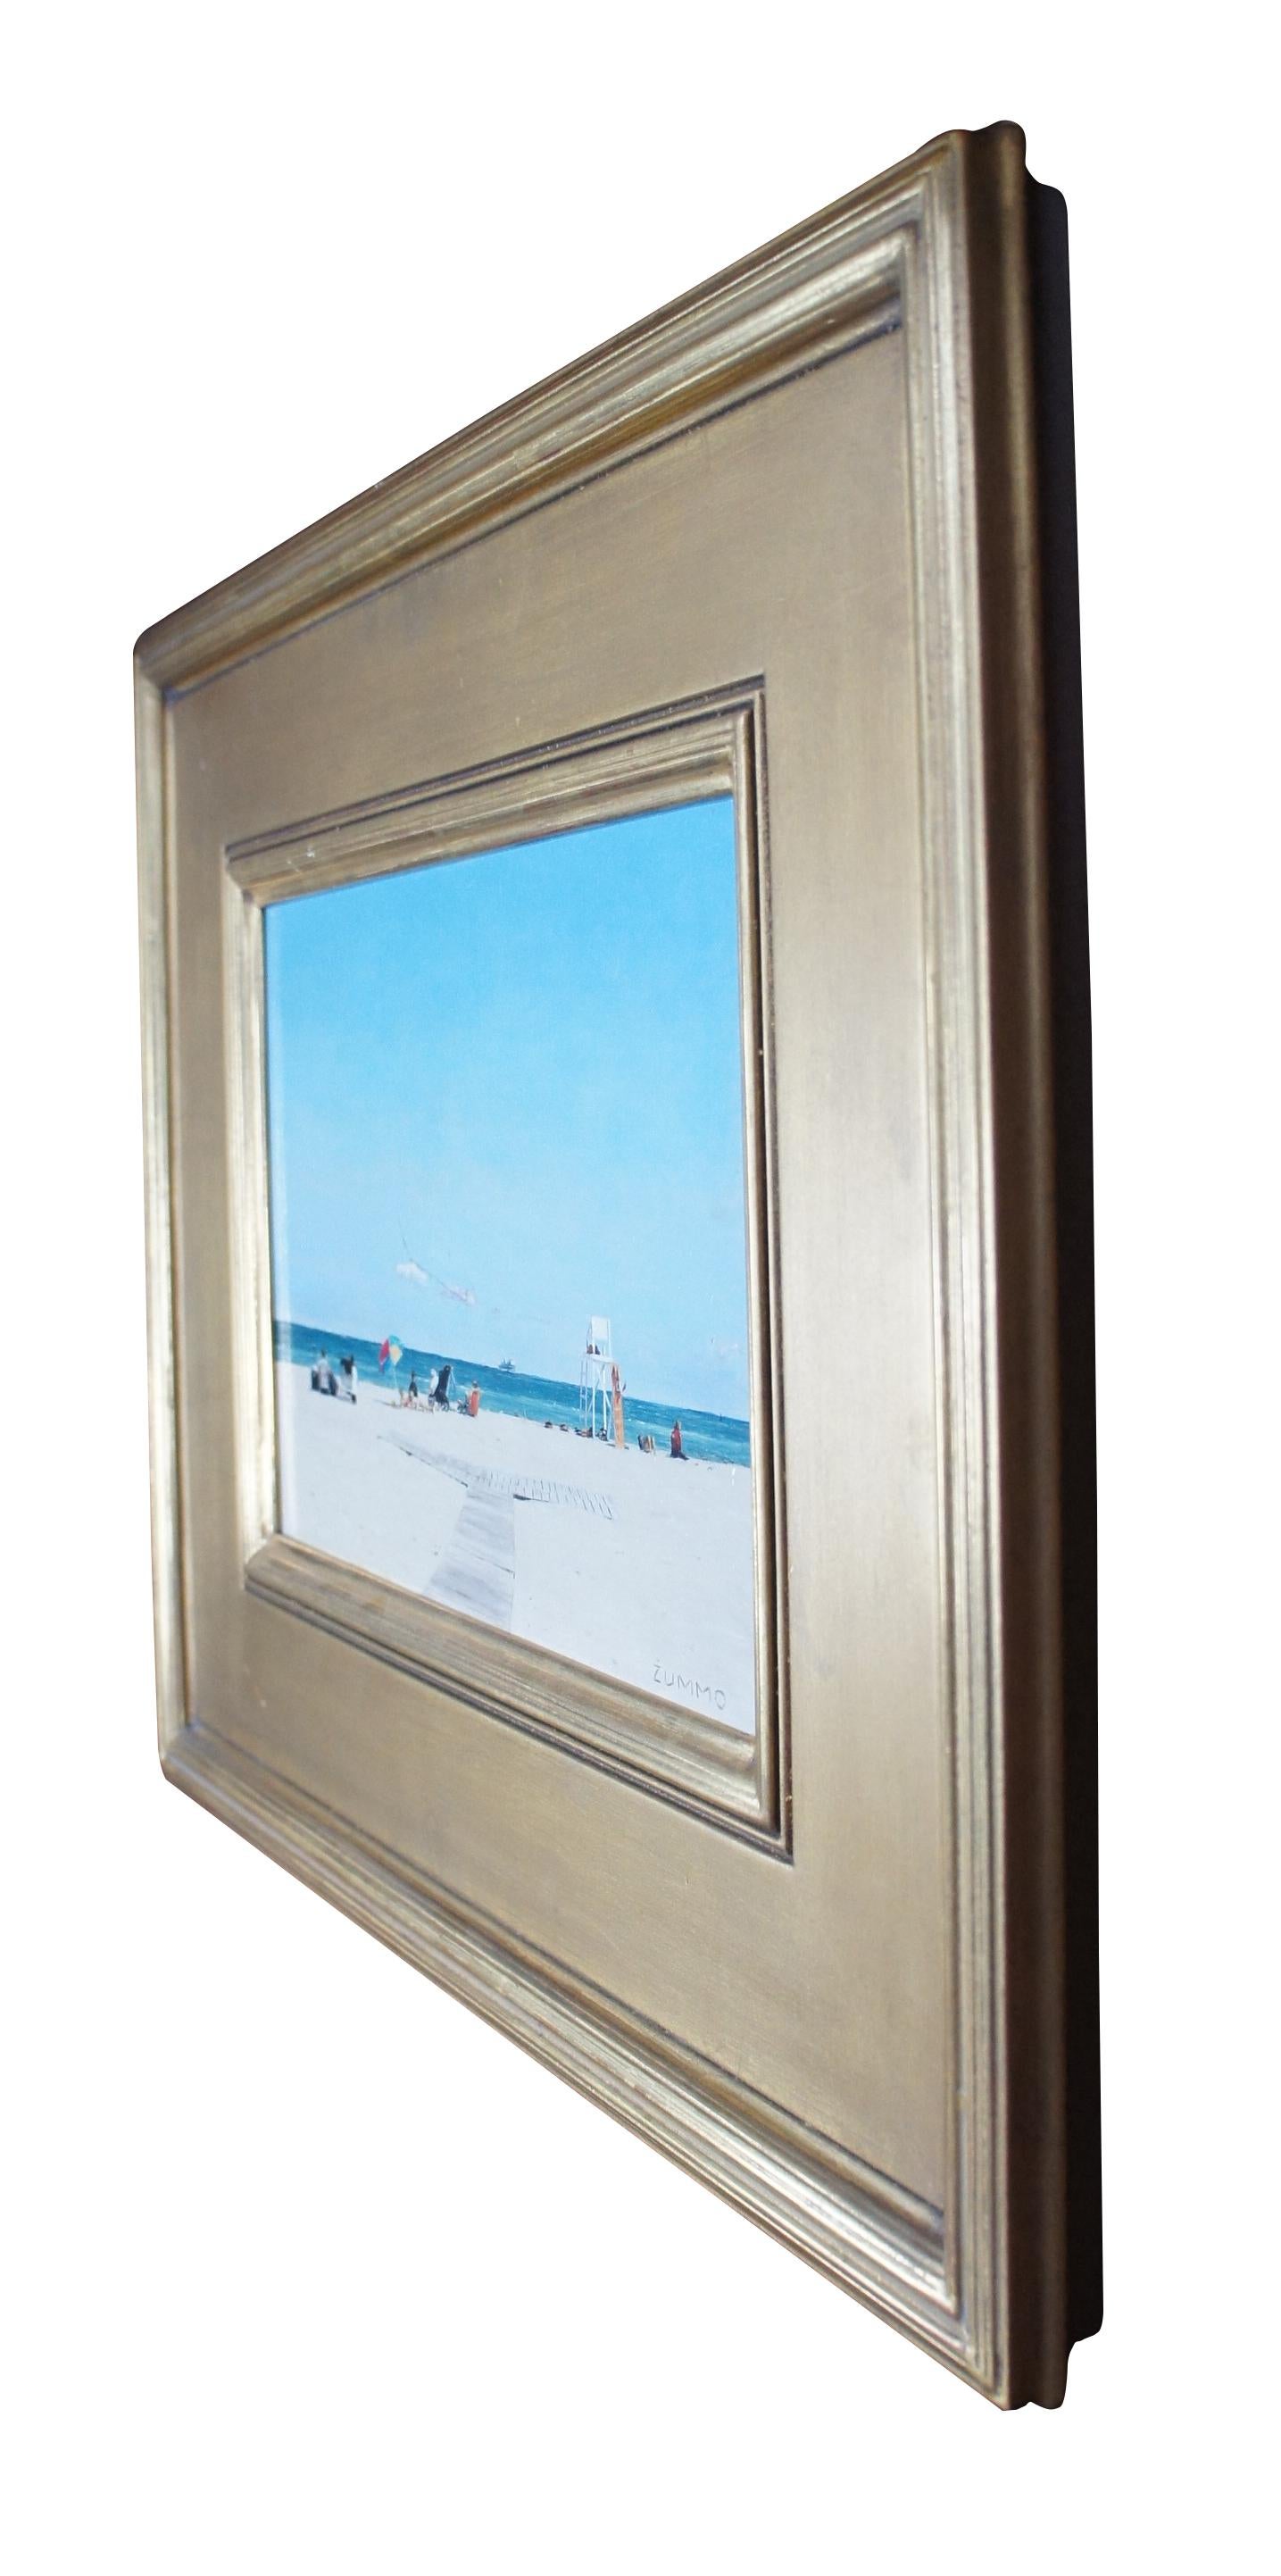 Vintage Lori Zummo Nantucket landscape / seascape oil painting on board titled Jetties Afternoon.

Provenance:
Estate of J. Frederic Gagel, owner of multiple Thoroughbred race horses that competed in the Narragansett Special and Kentucky Derby.